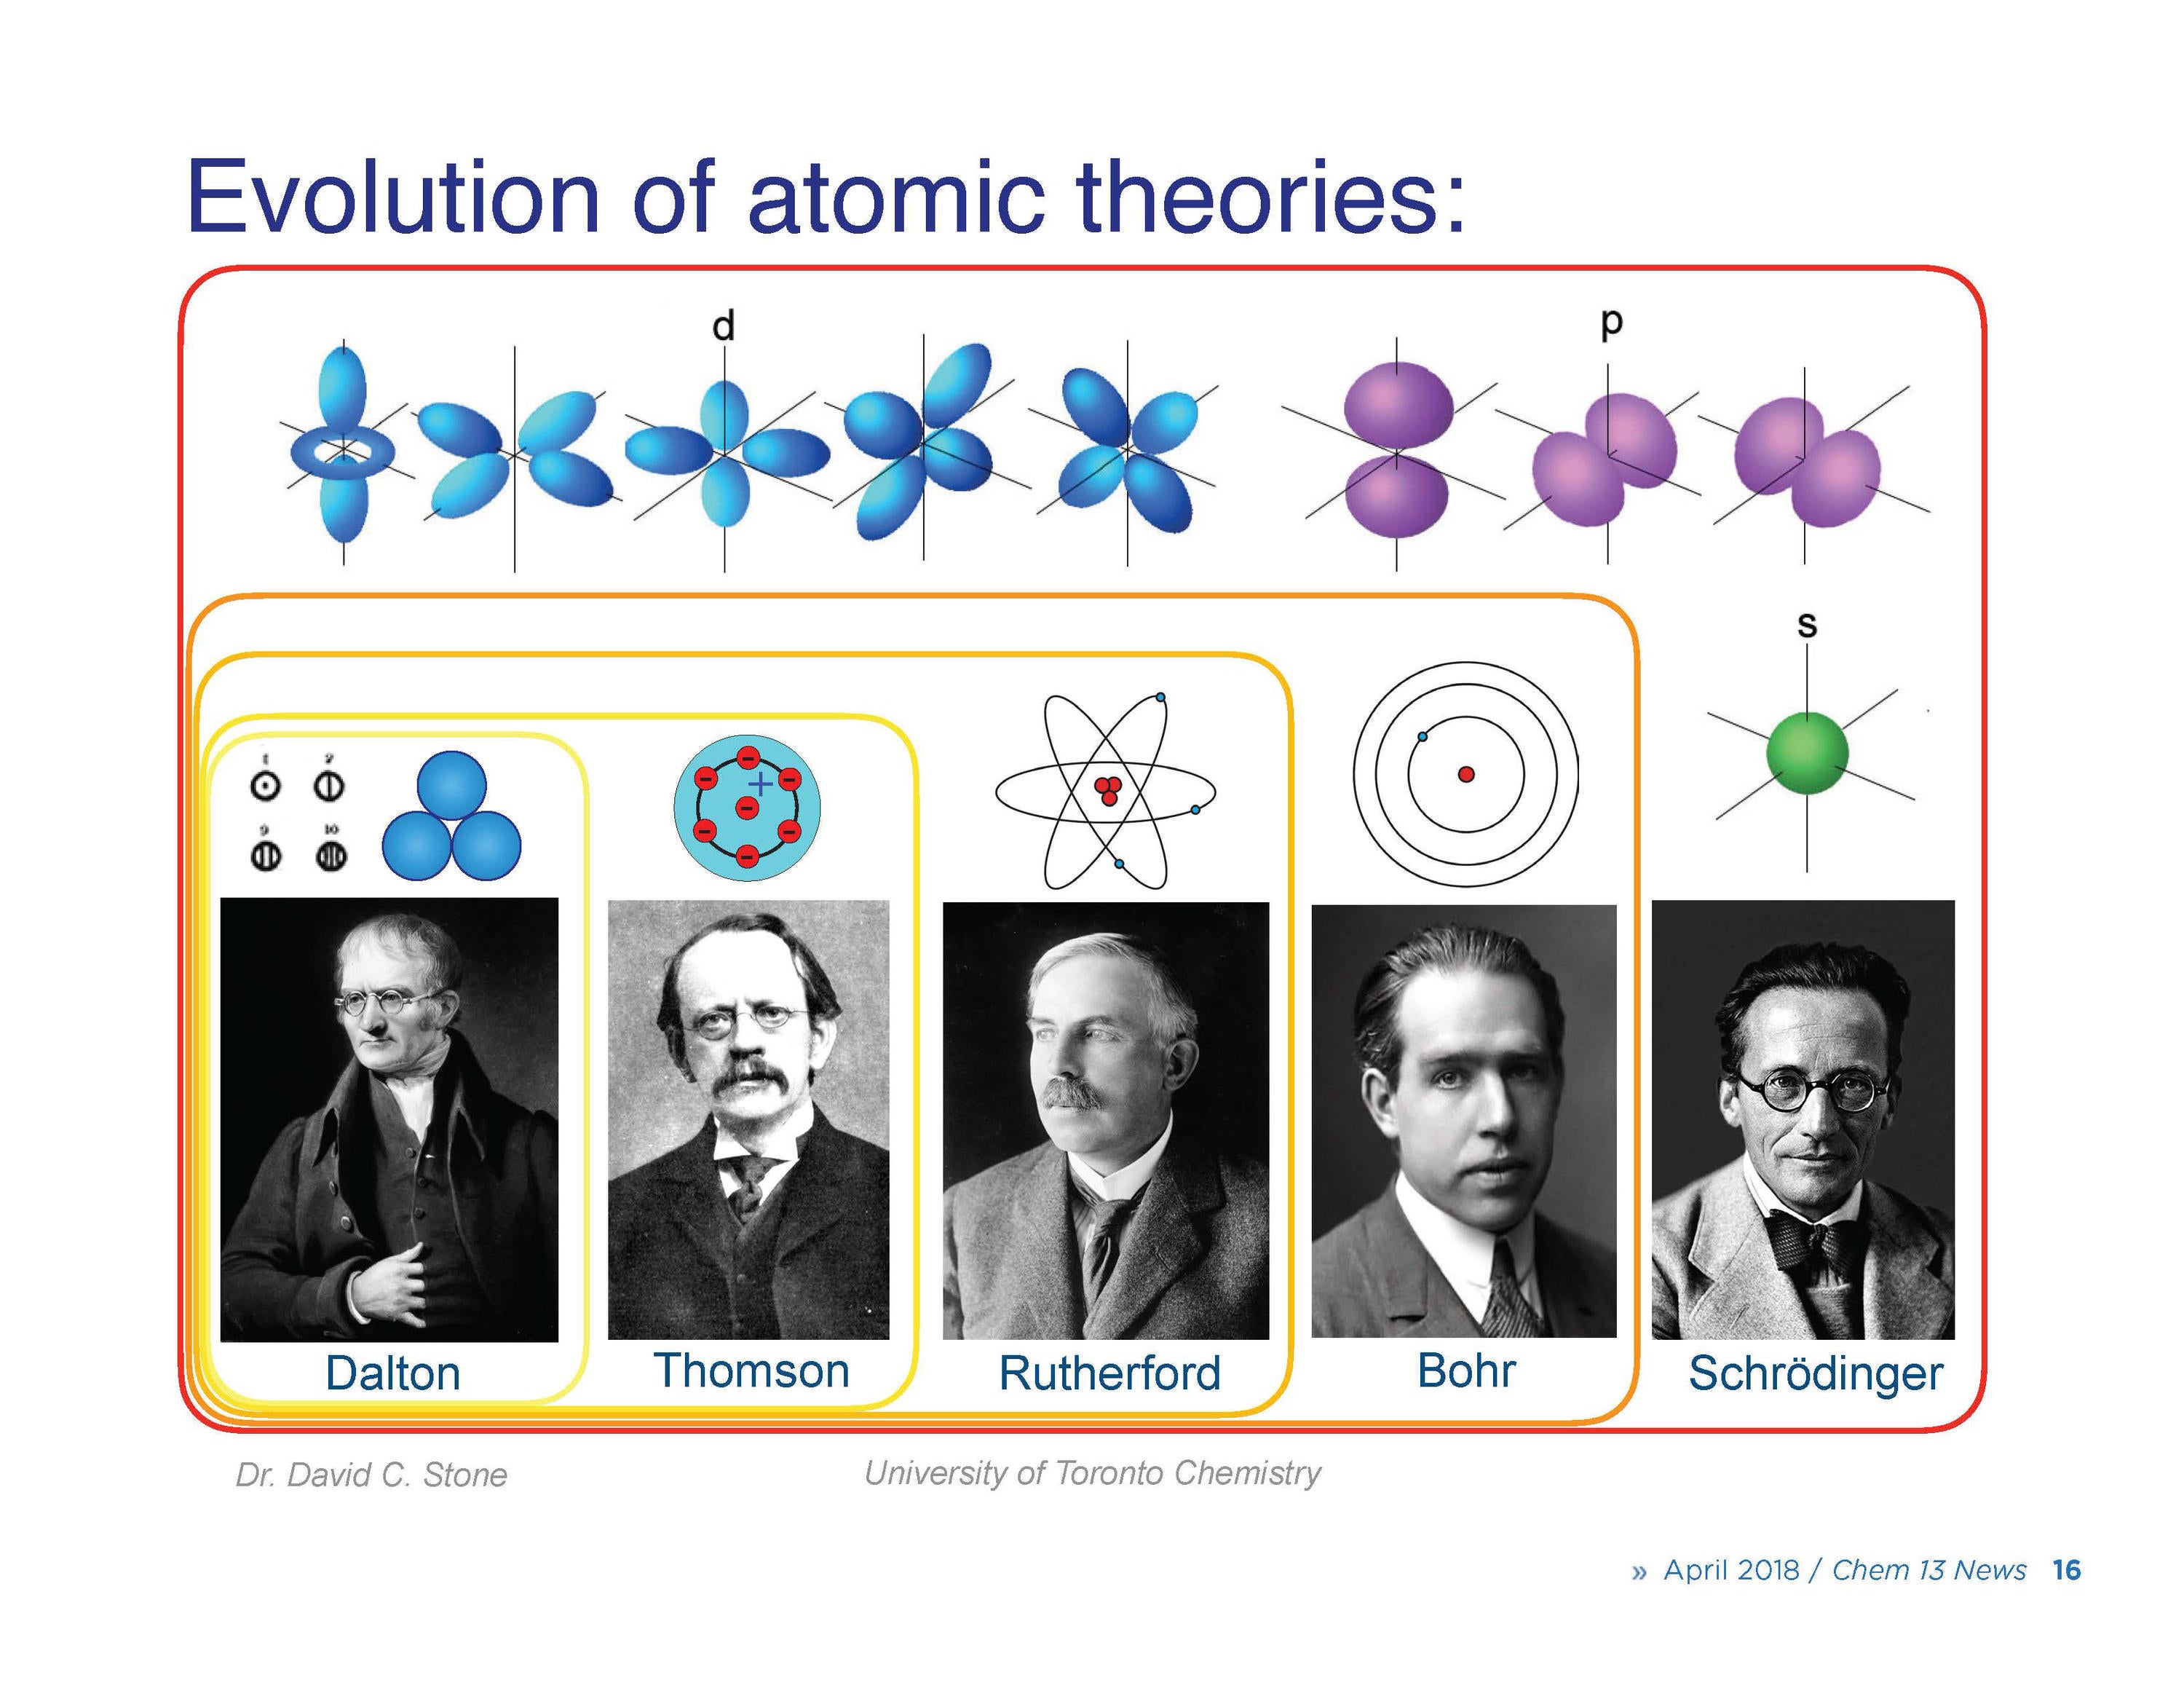 photos of Dalton, Thomson, Rutherford, Bohr and Schodinger -- each with the models of the atom that they developed